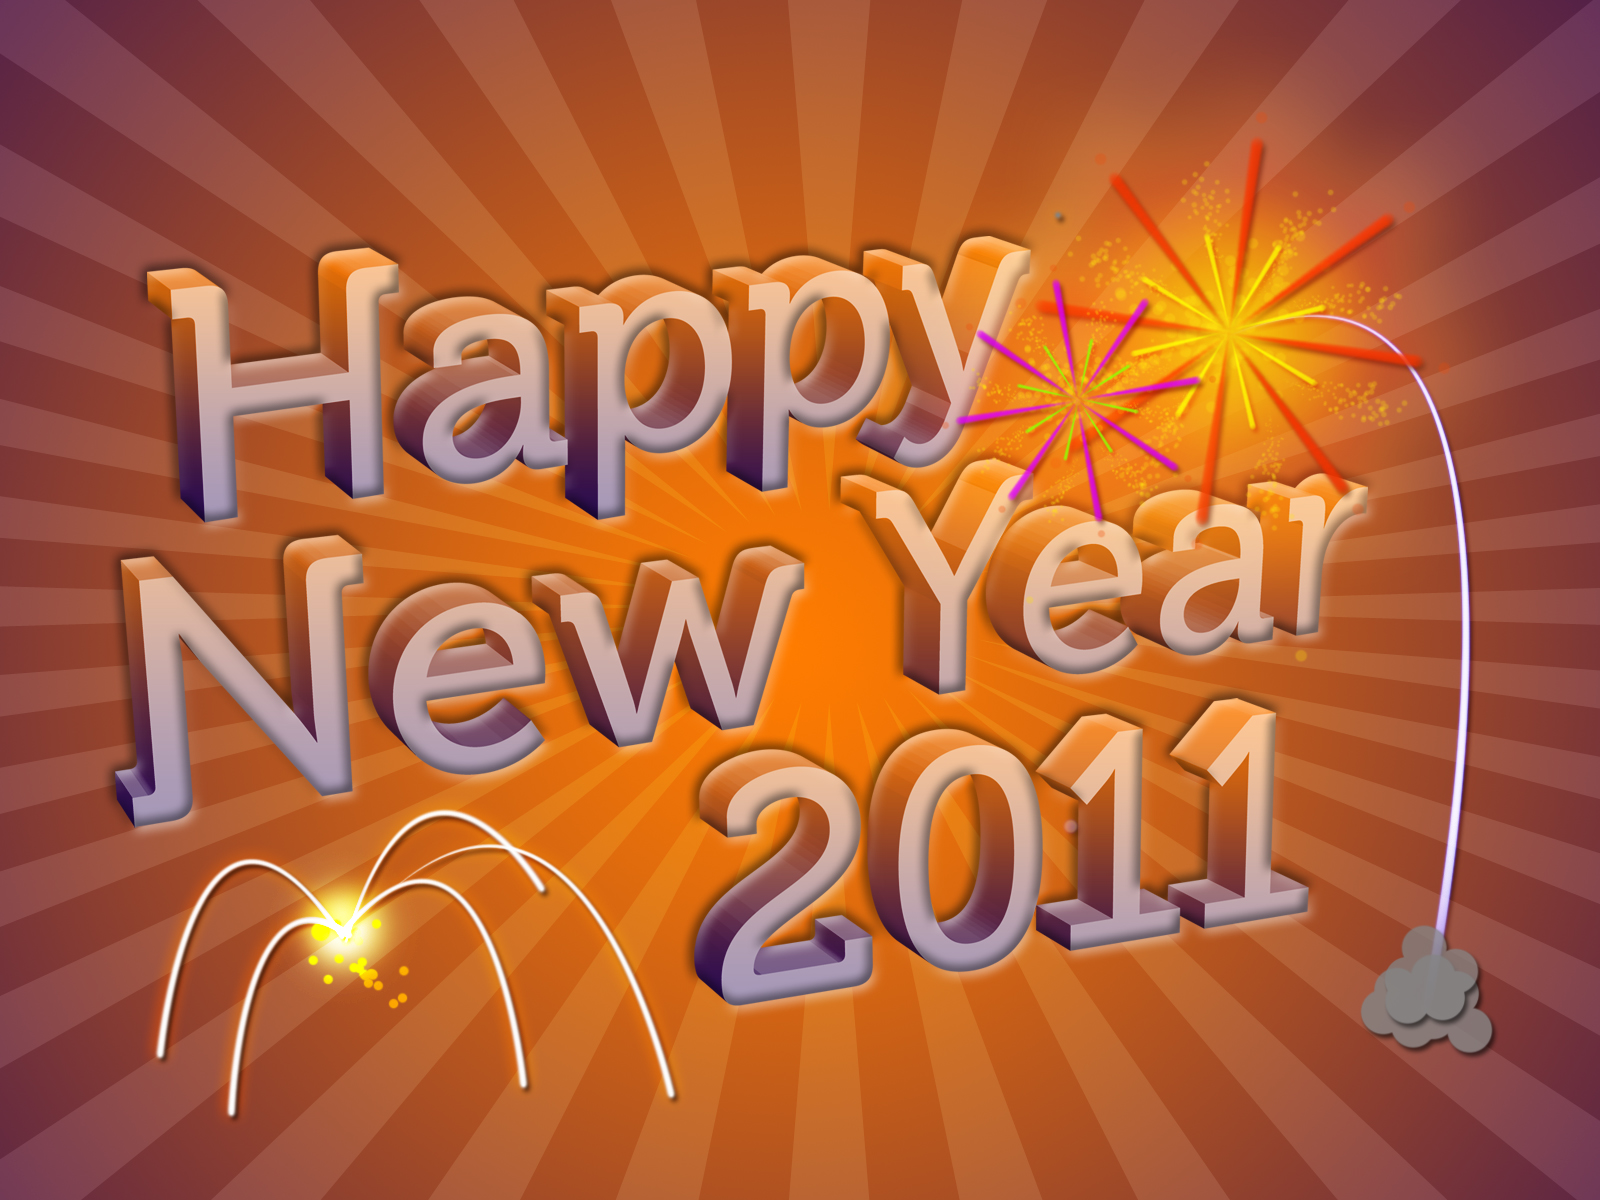 happy new year wallpaper download,text,font,new years day,diwali,holiday